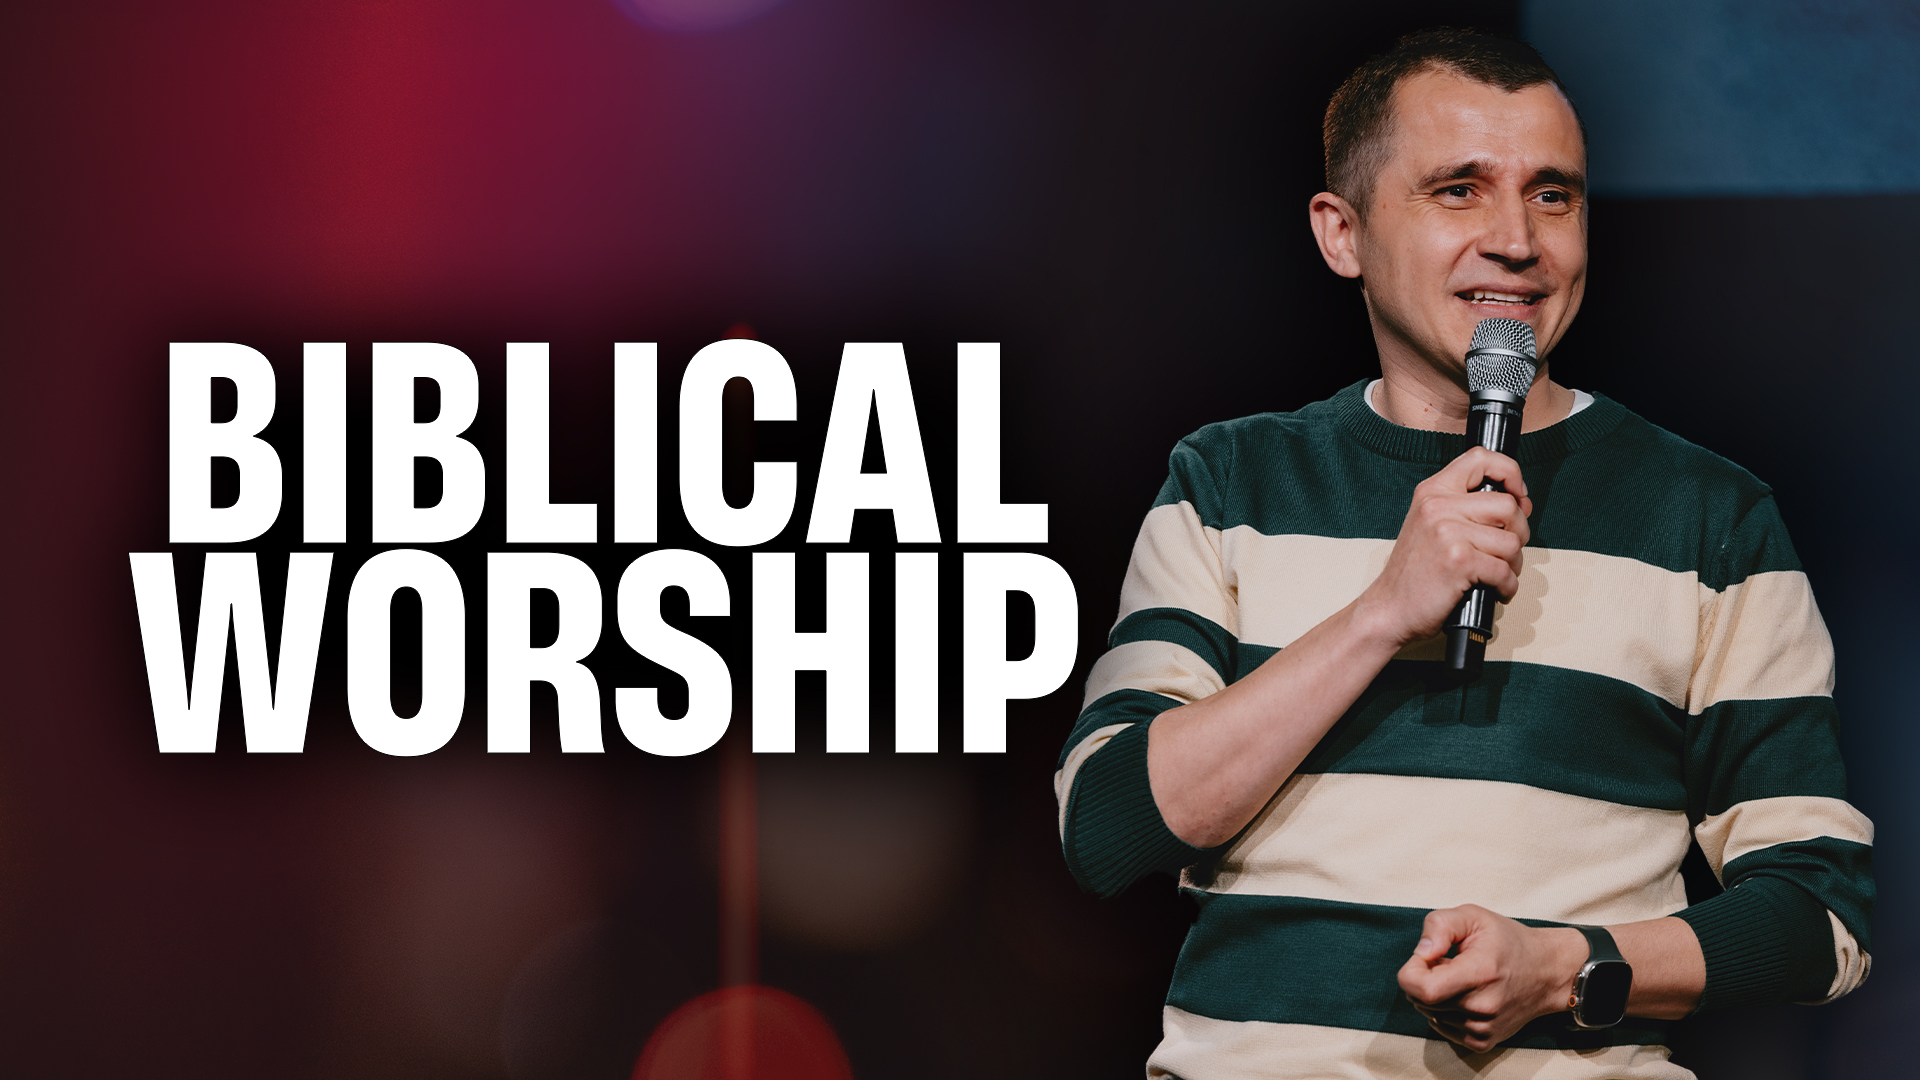 Featured Image for “Biblical Worship”